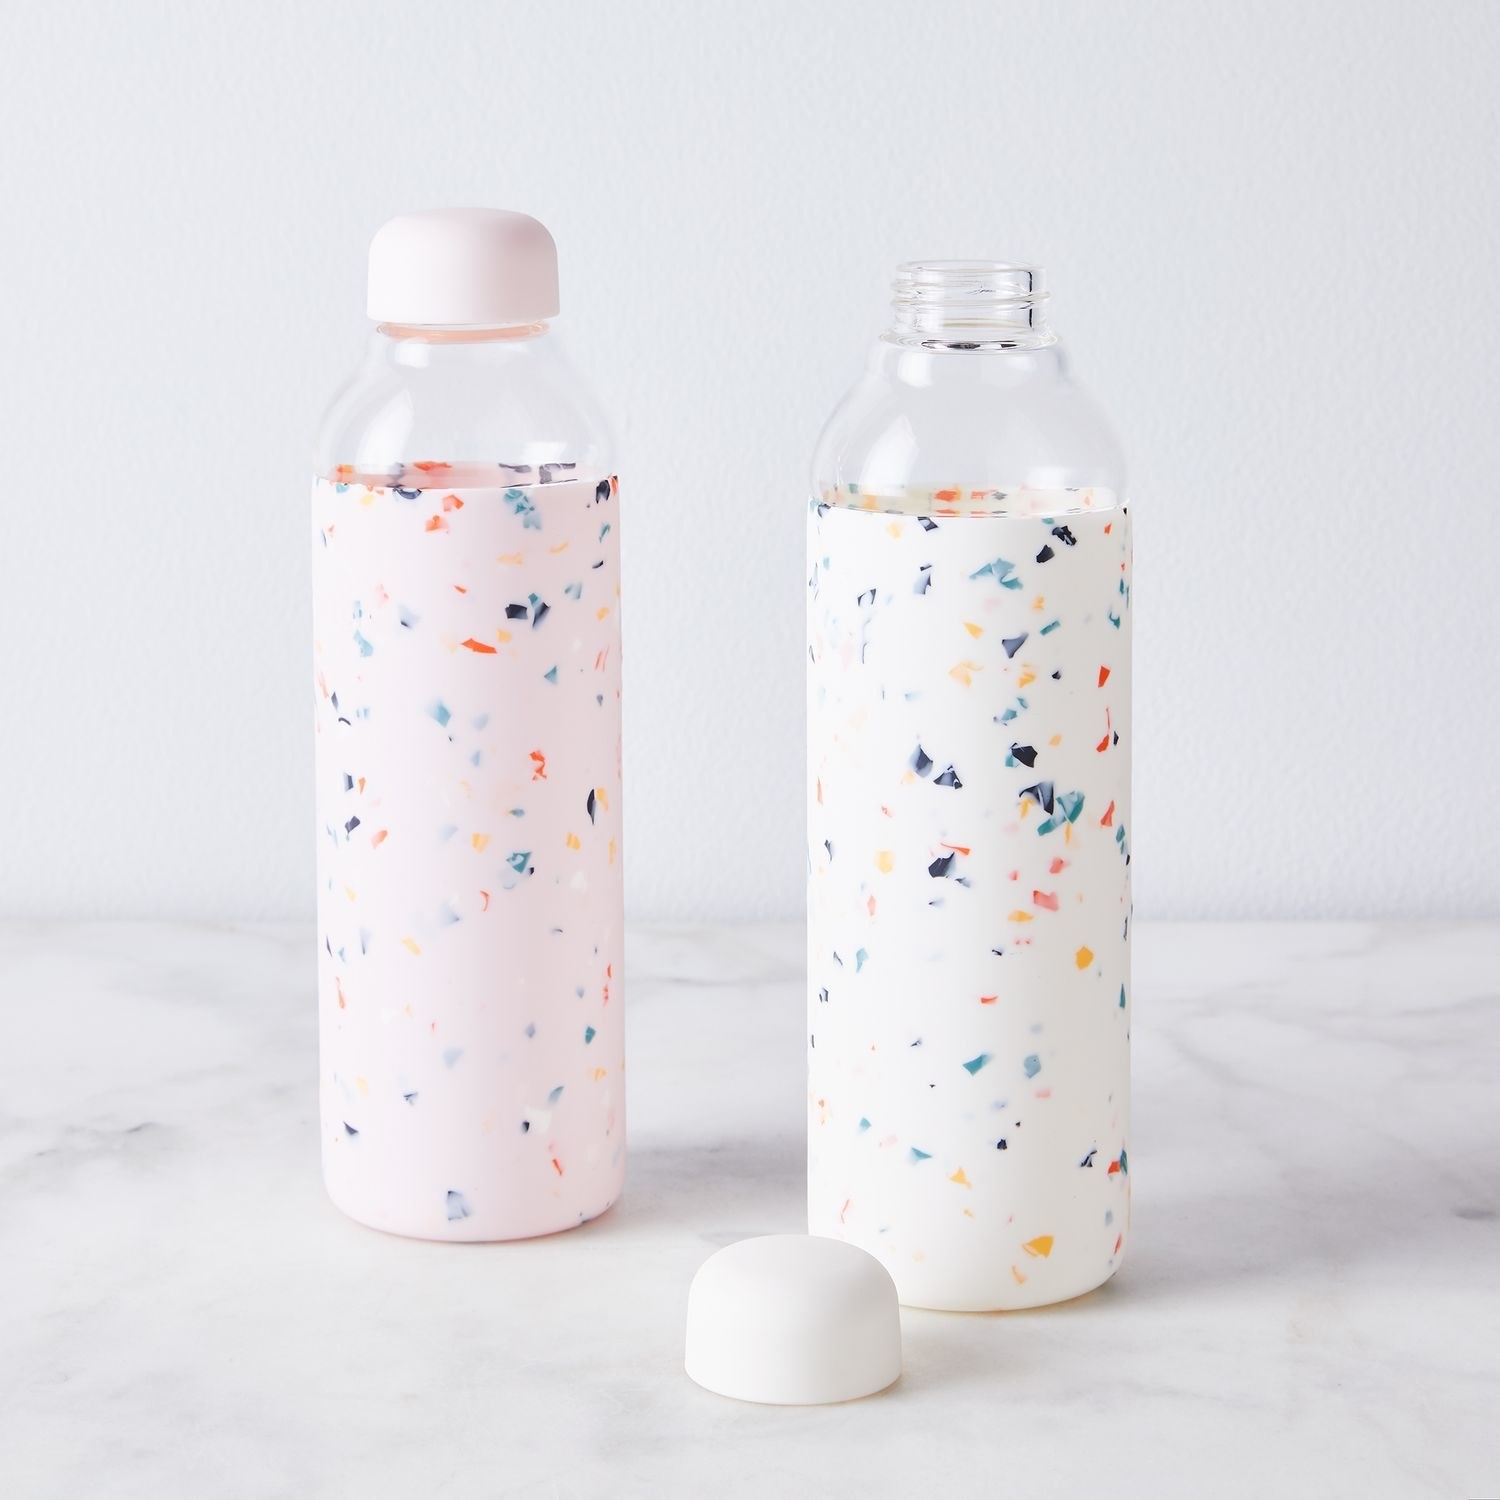 A pair of water bottles with speckled primary colors and rounded caps 